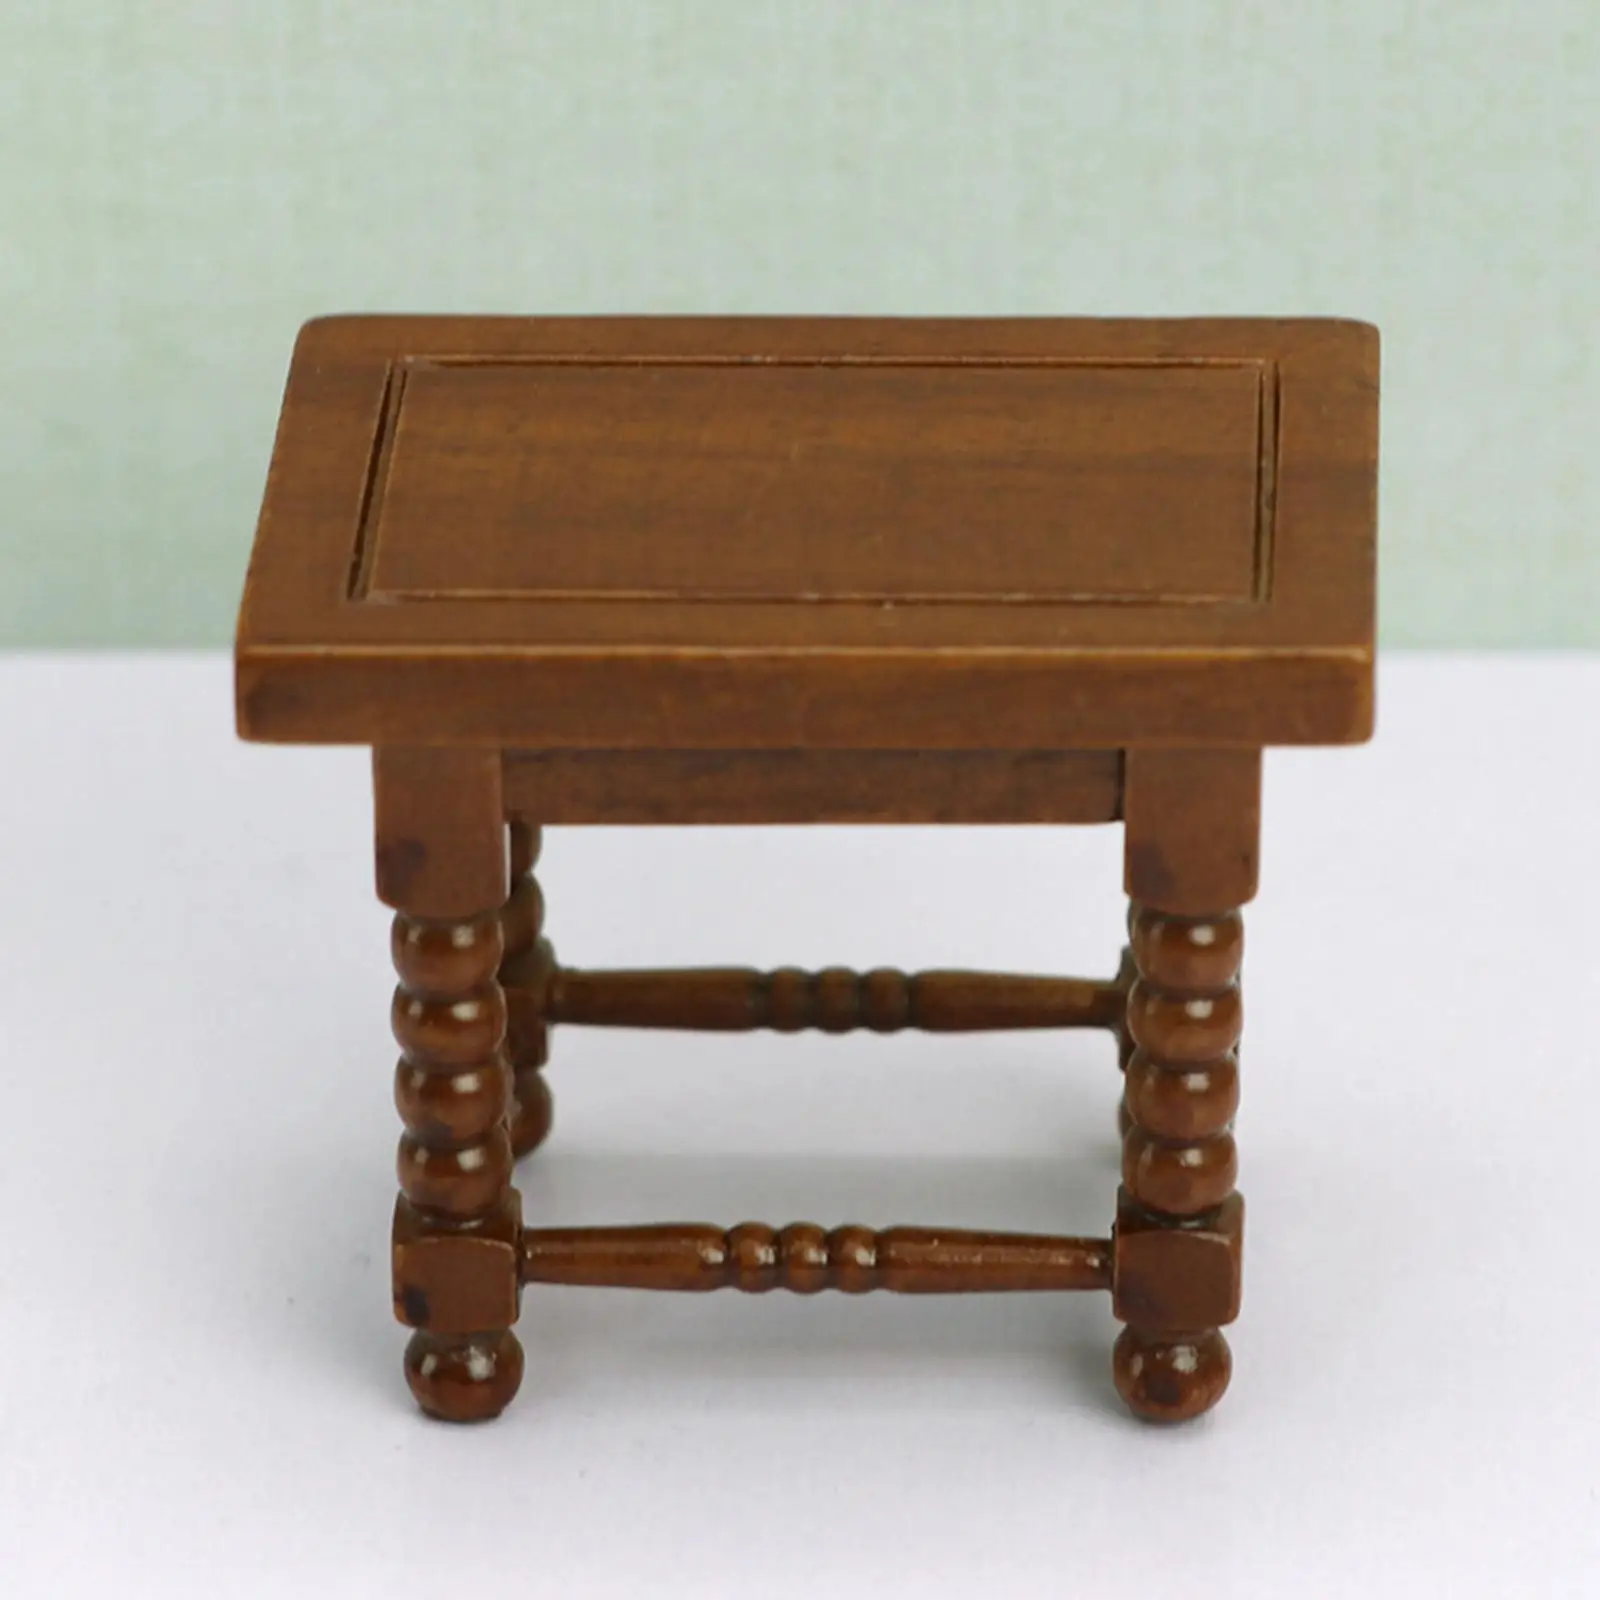 Simulated 1:12 Scale Doll House End Table Wooden Life Scene Scenery Elegant